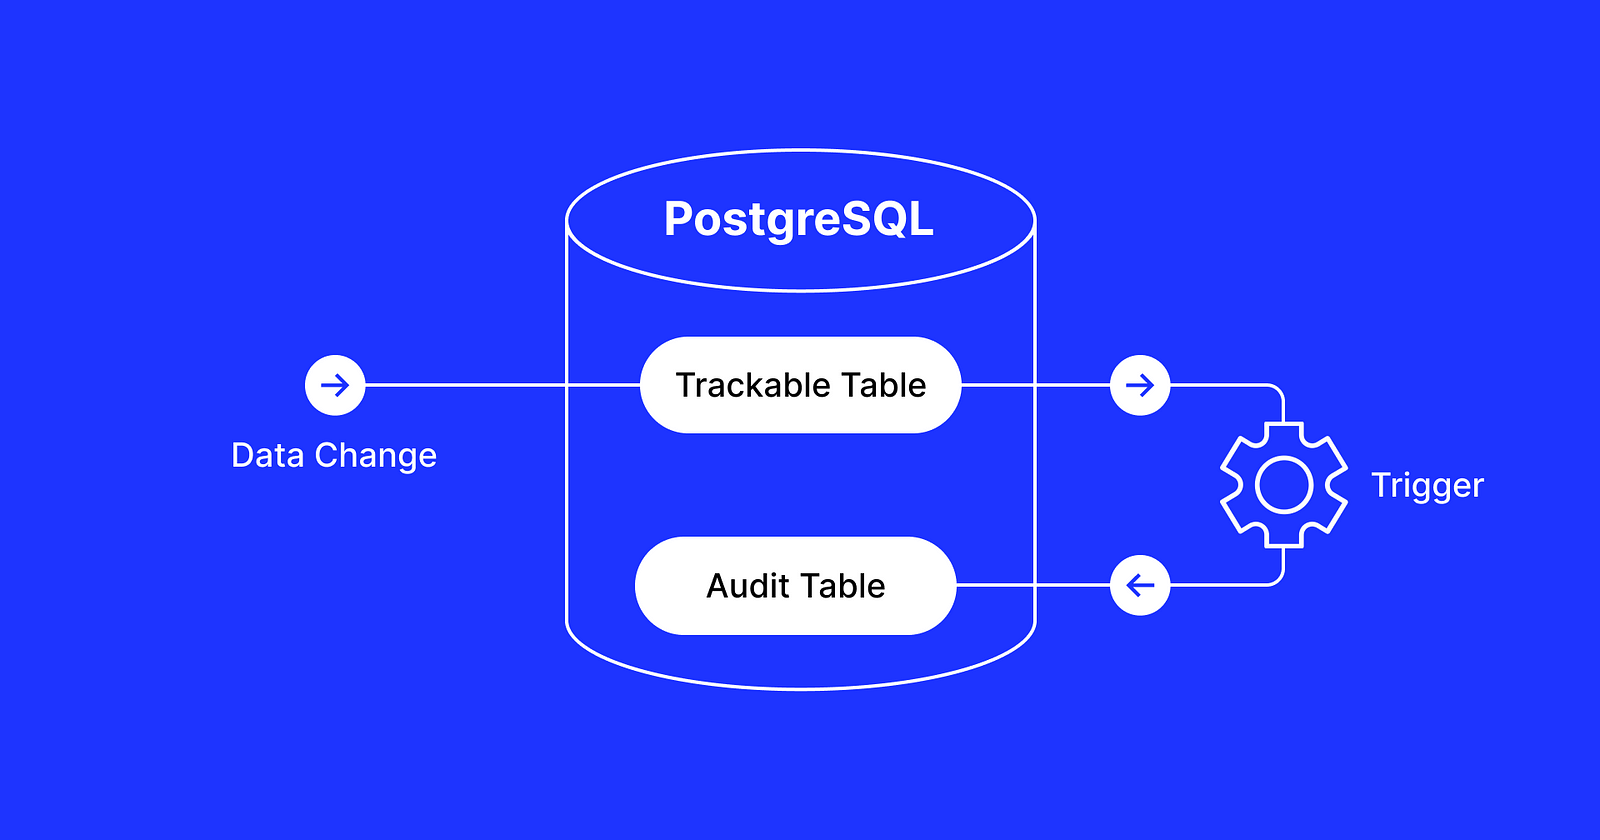 A PostgreSQL trigger with an audit table